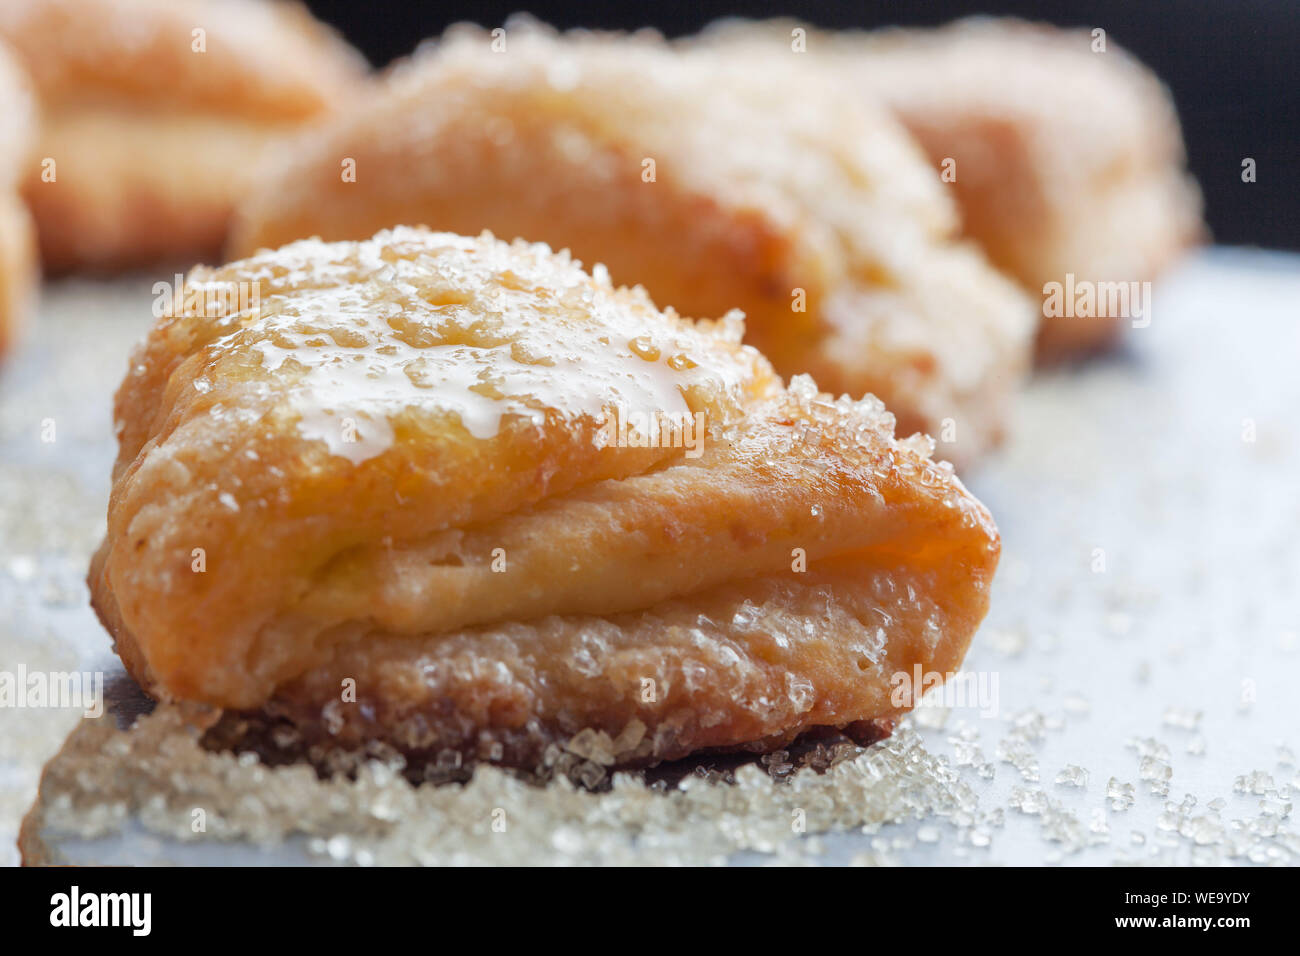 Close-up Of Sweet Food On Table Stock Photo